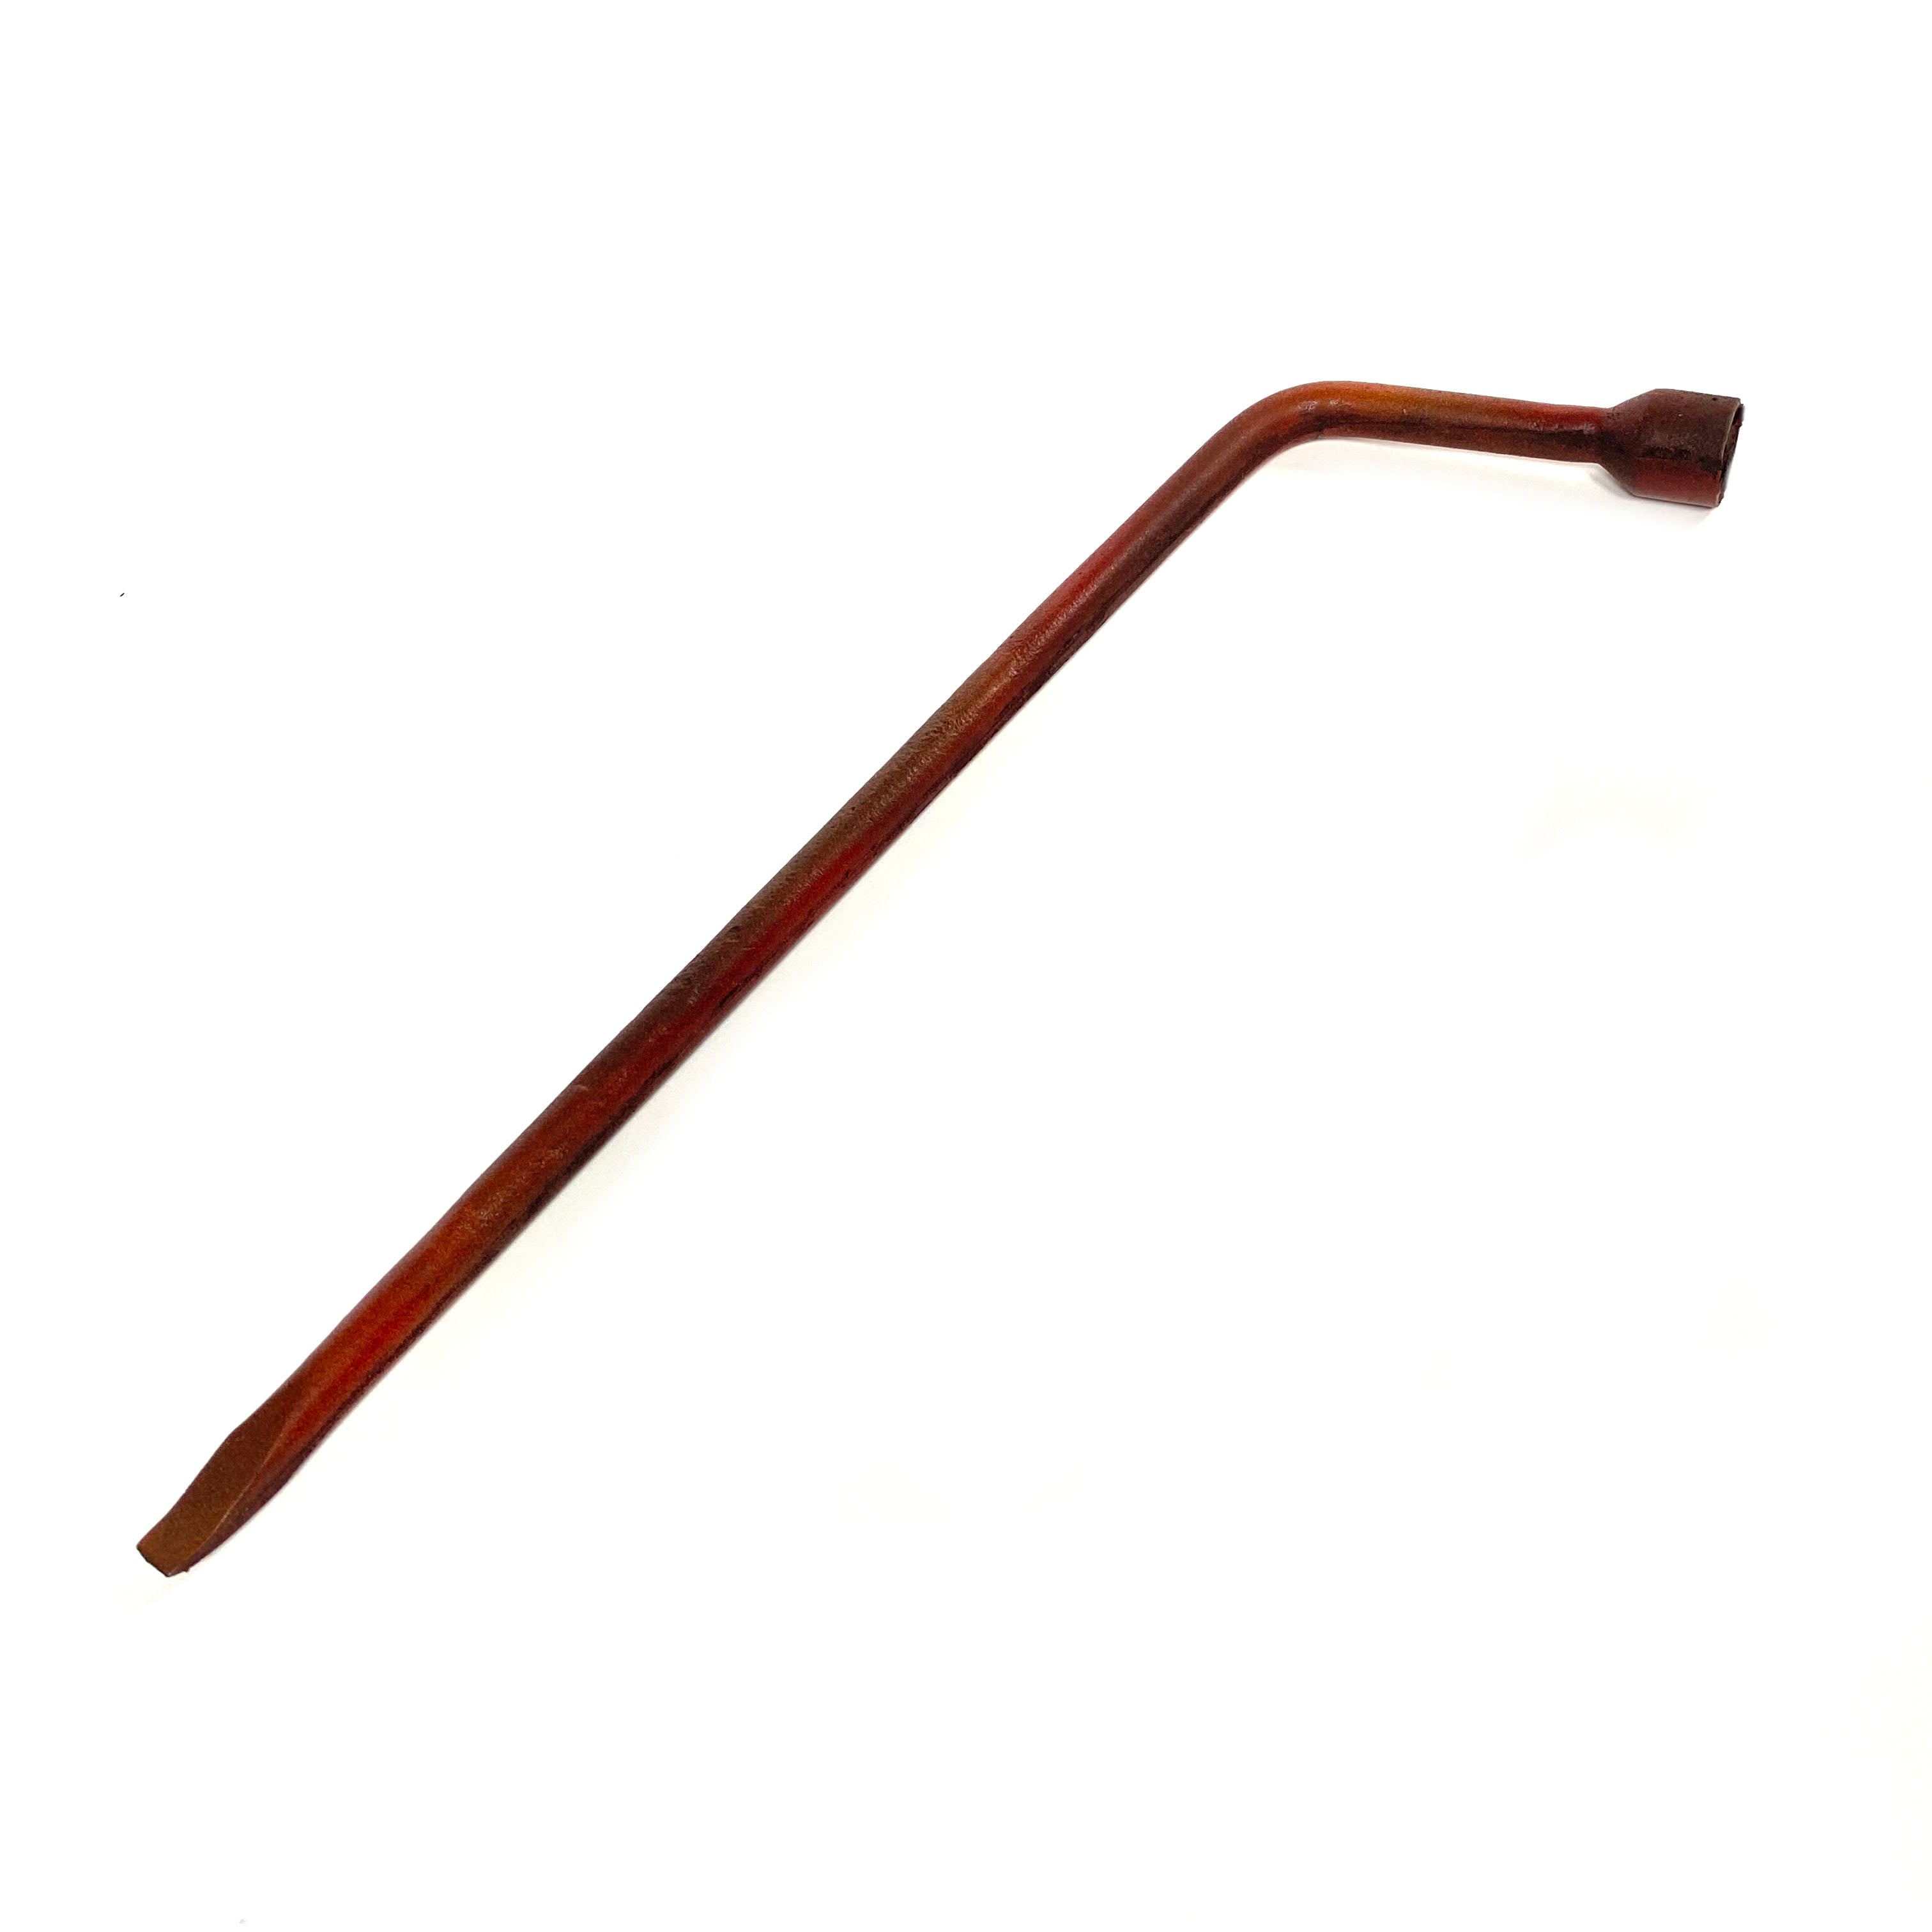 Rubber Tire Iron Stunt Flexible Special Effects Action Prop - RUSTY - Rusty